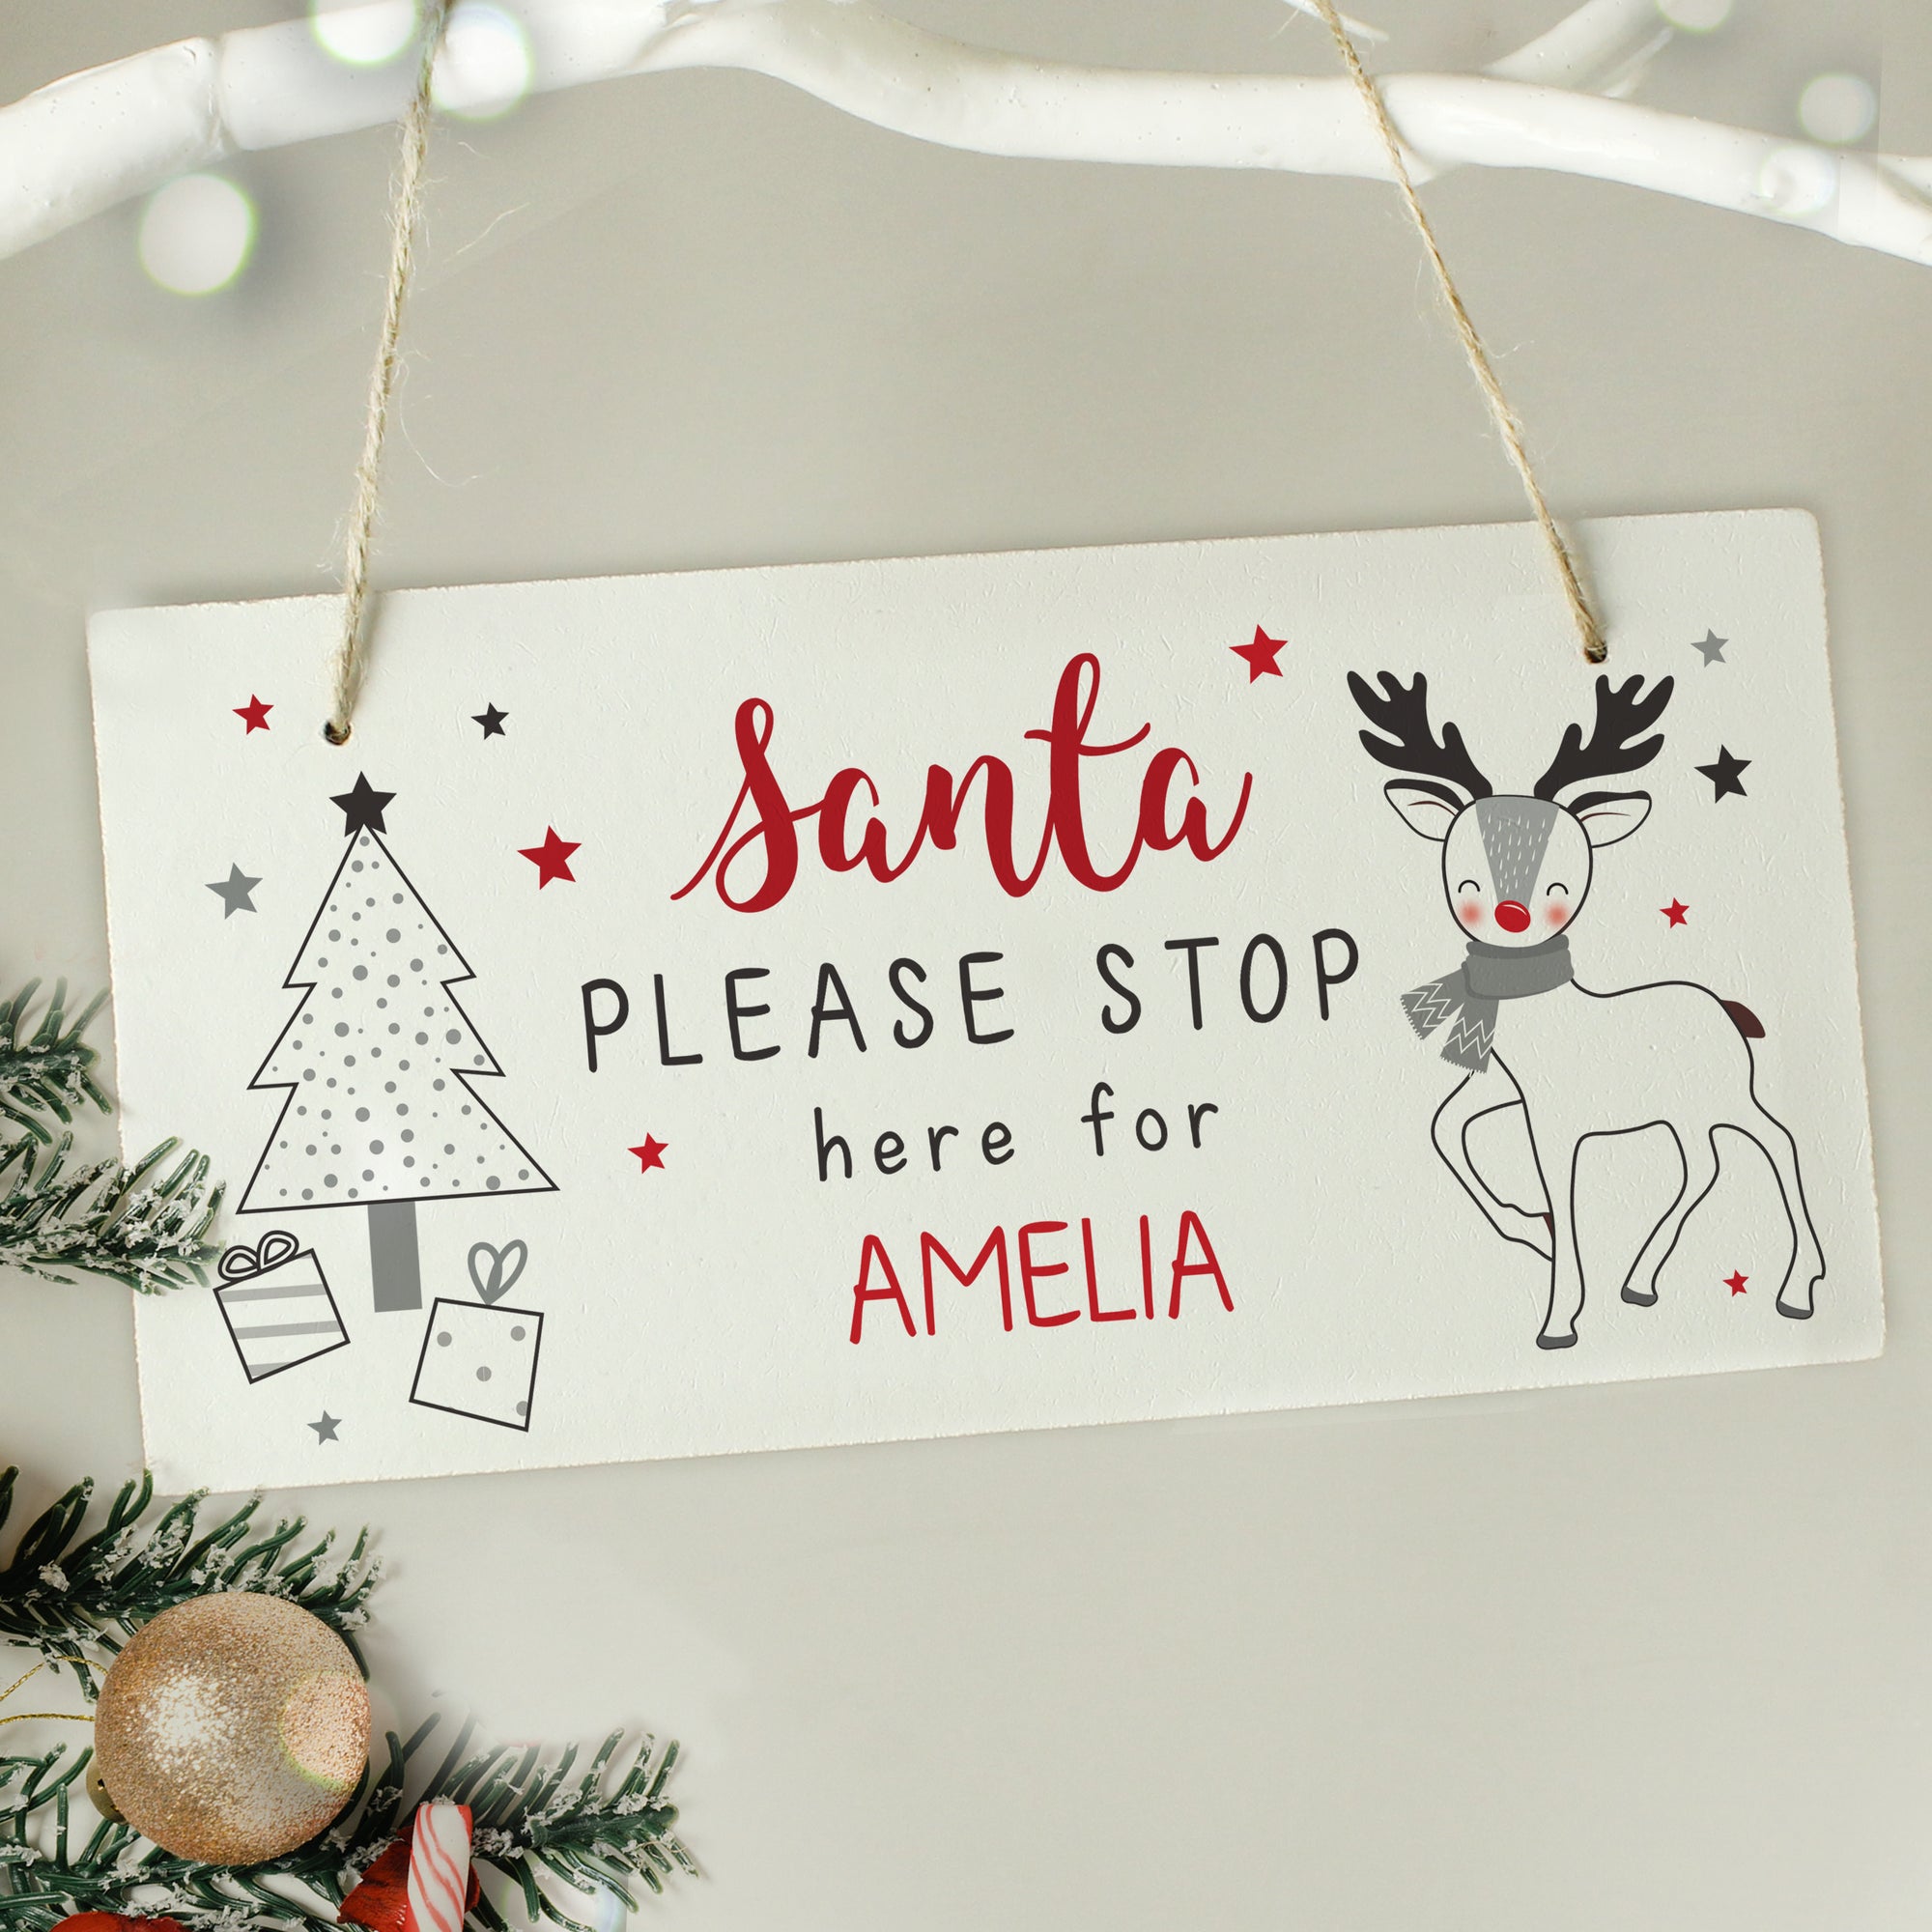 Image of a white wooden Christmas Eve plaque that is printed with the text 'Santa please stop here for' which is fixed and you can then add your own names. The sign features a modern image of a Chrismtas tree with gifts underneath it as well as a reindeer.